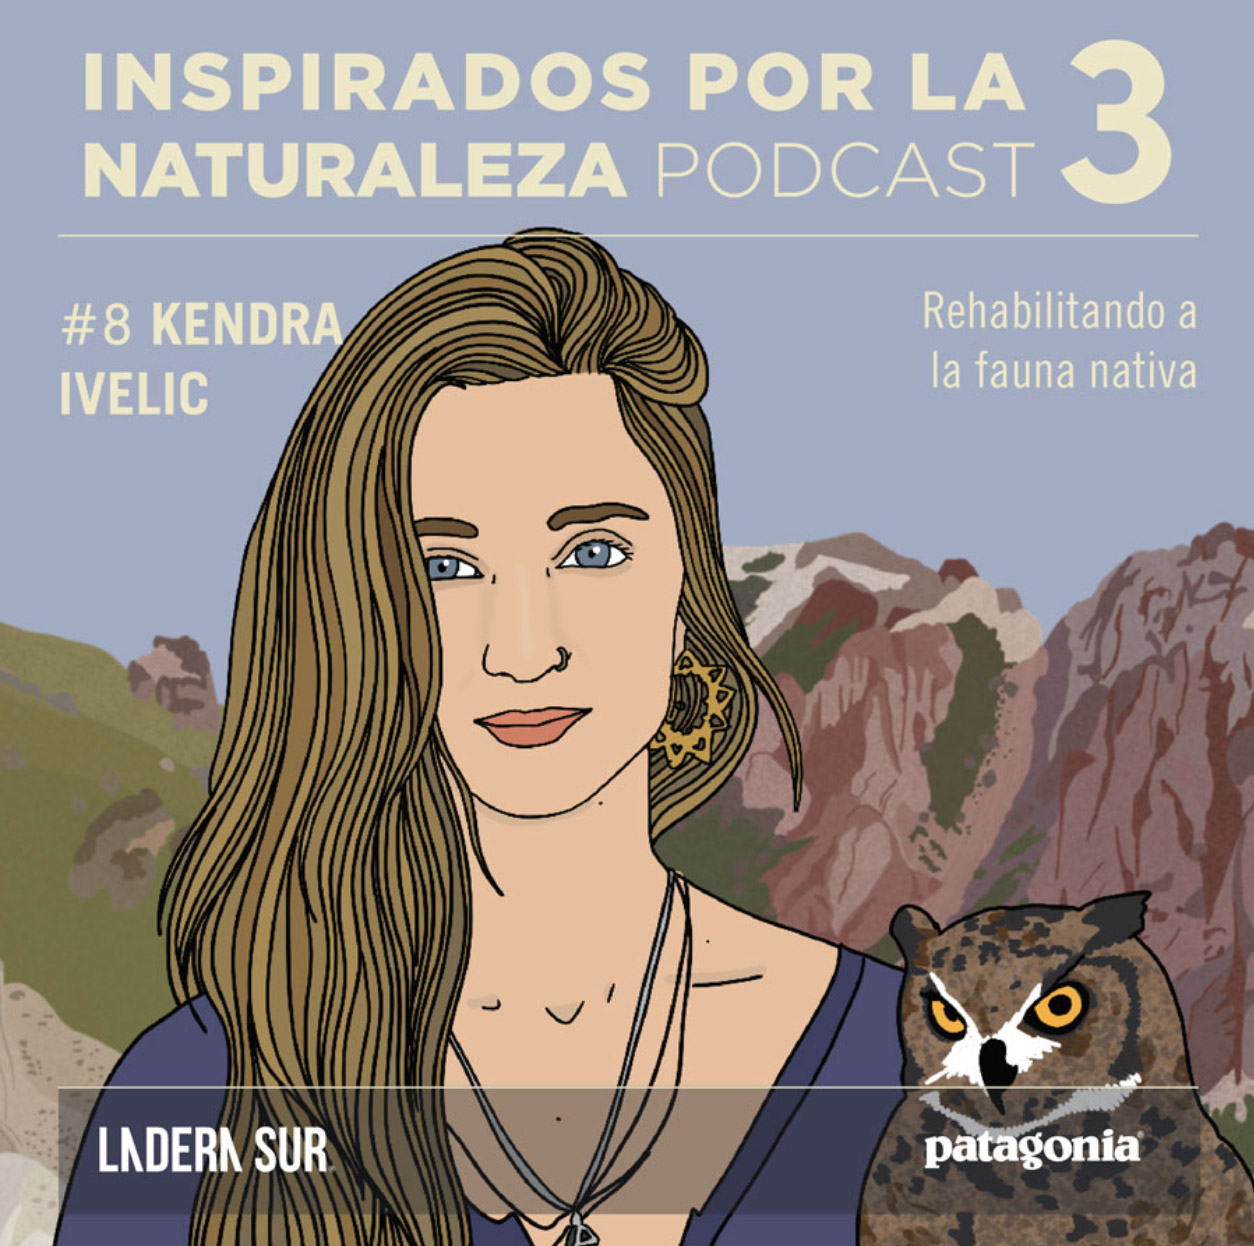 Ladera Sur podcast “Inspired by Nature, Rehabilitating wildlife”